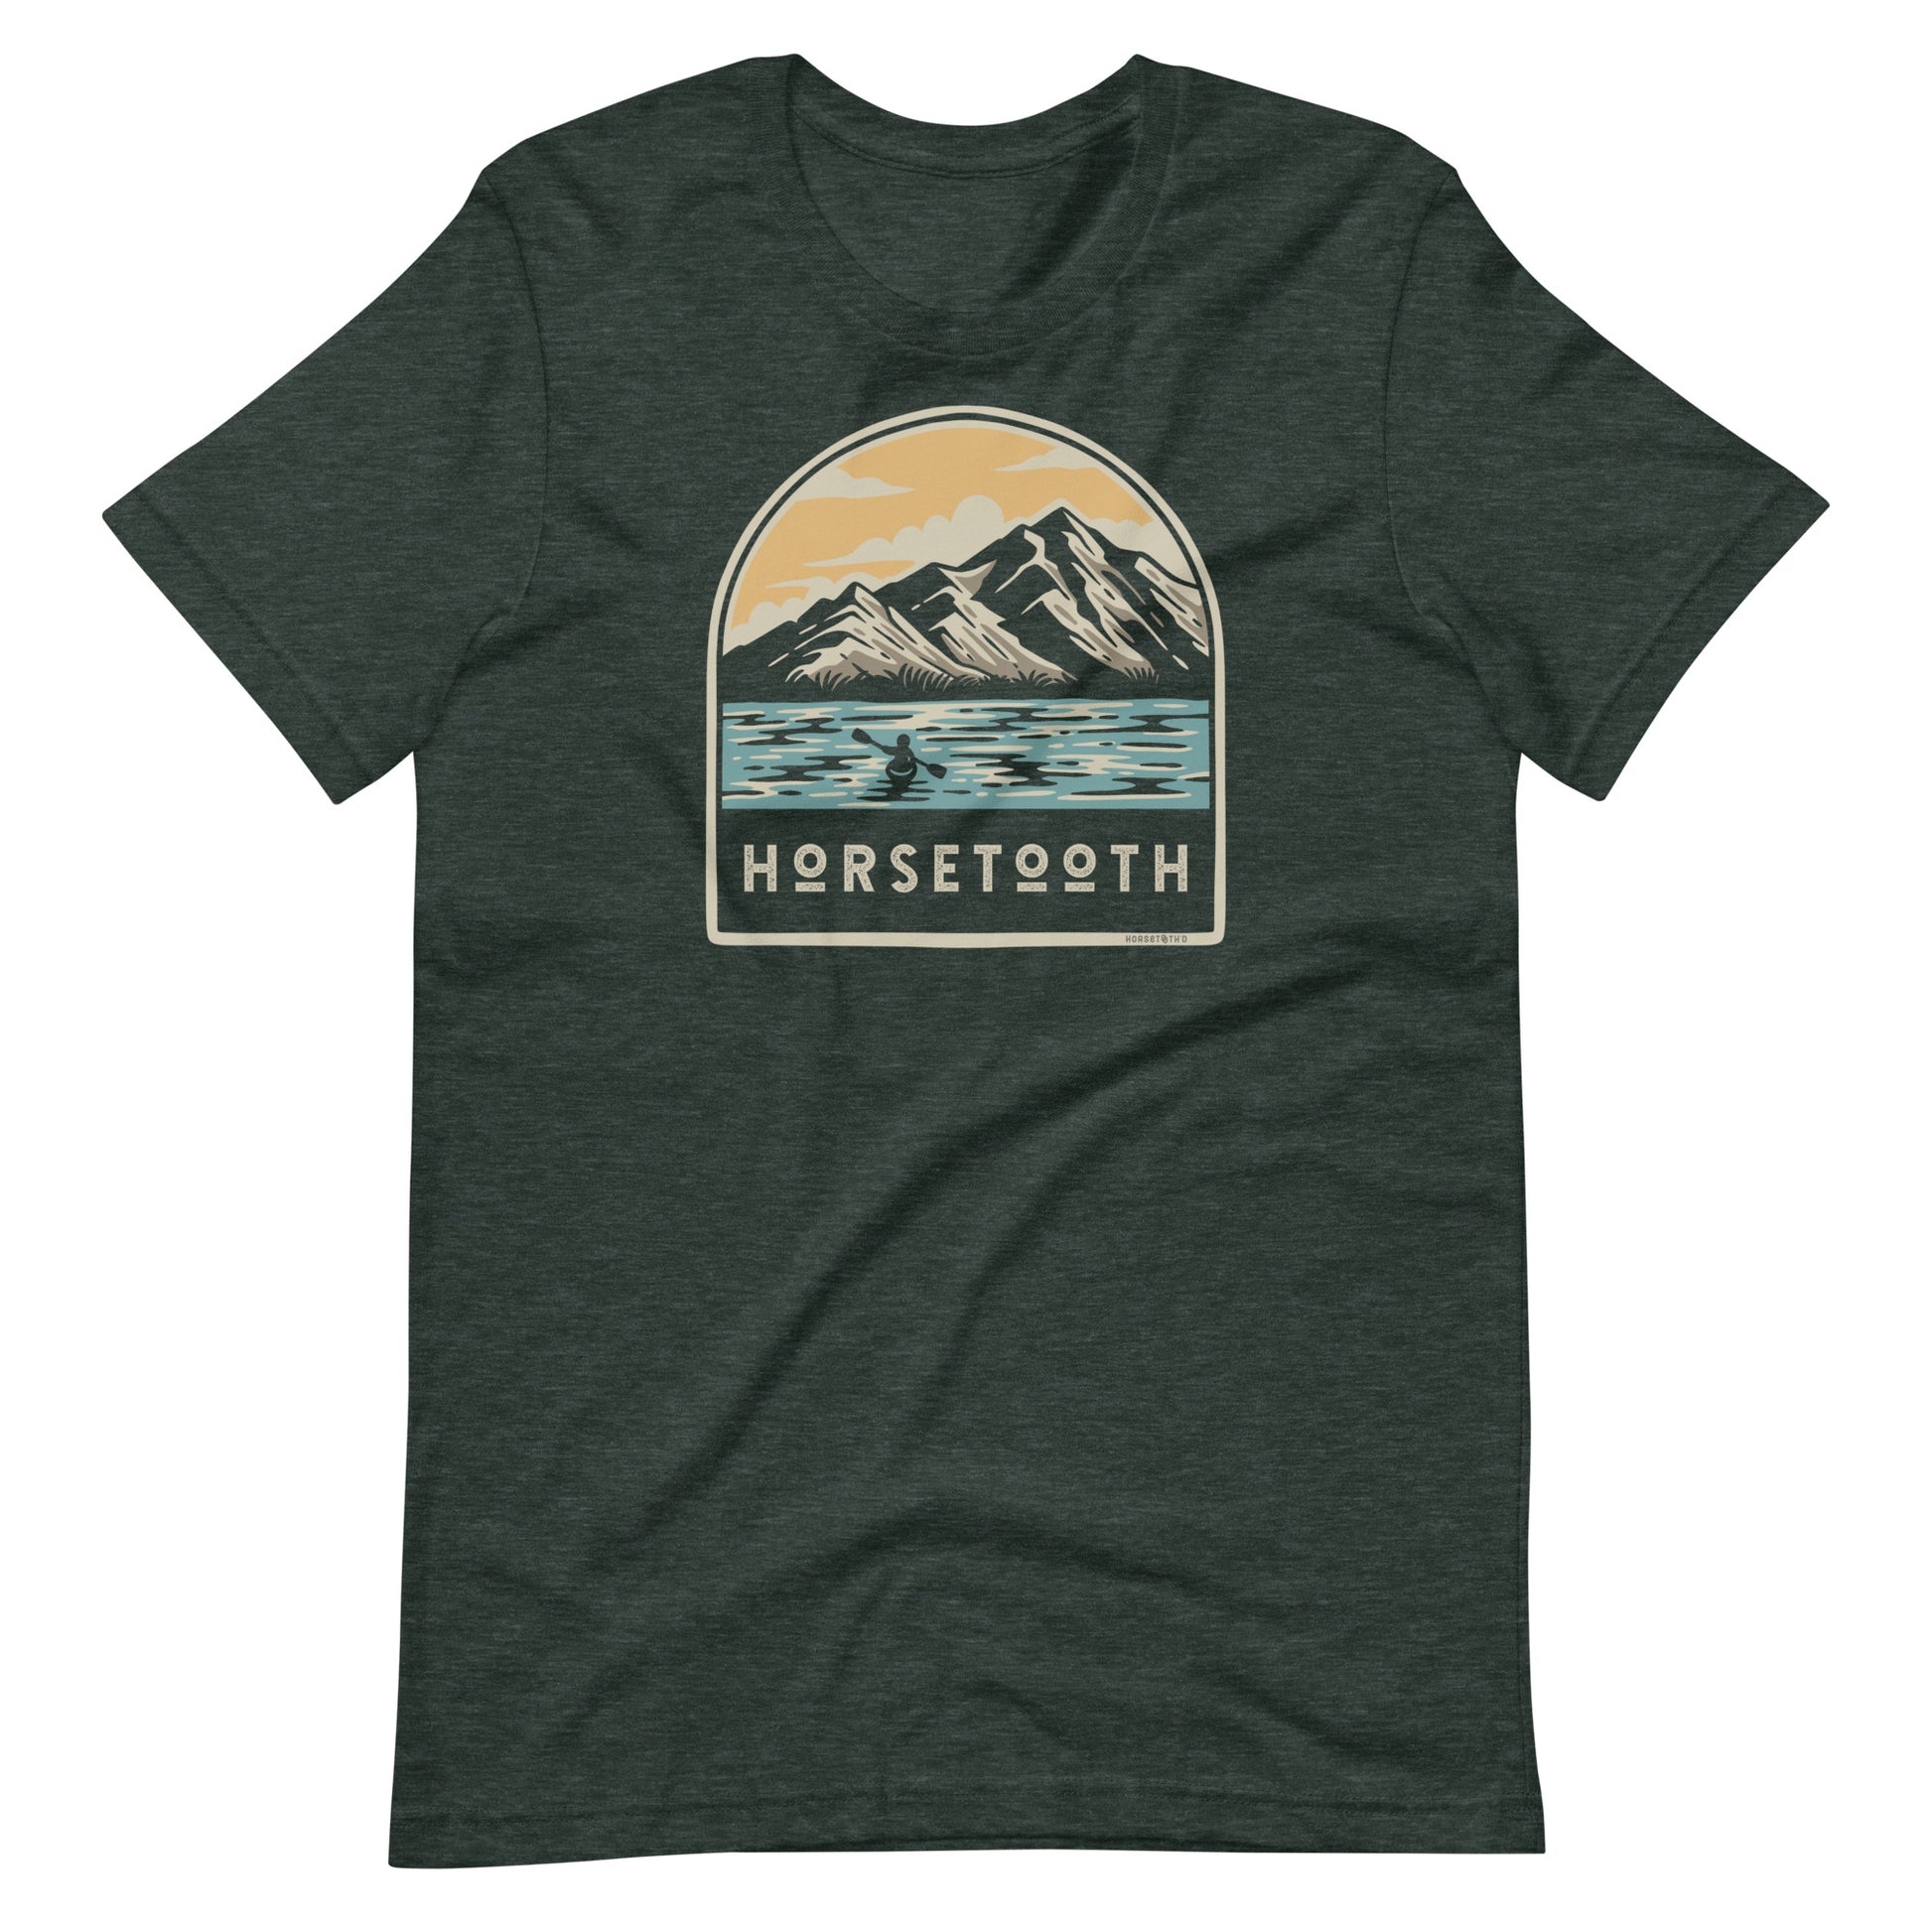 Horsetooth'd branded t-shirt, showcasing the adventure of kayaking on Horsetooth Reservoir, in a comfortable cotton-polyester blend